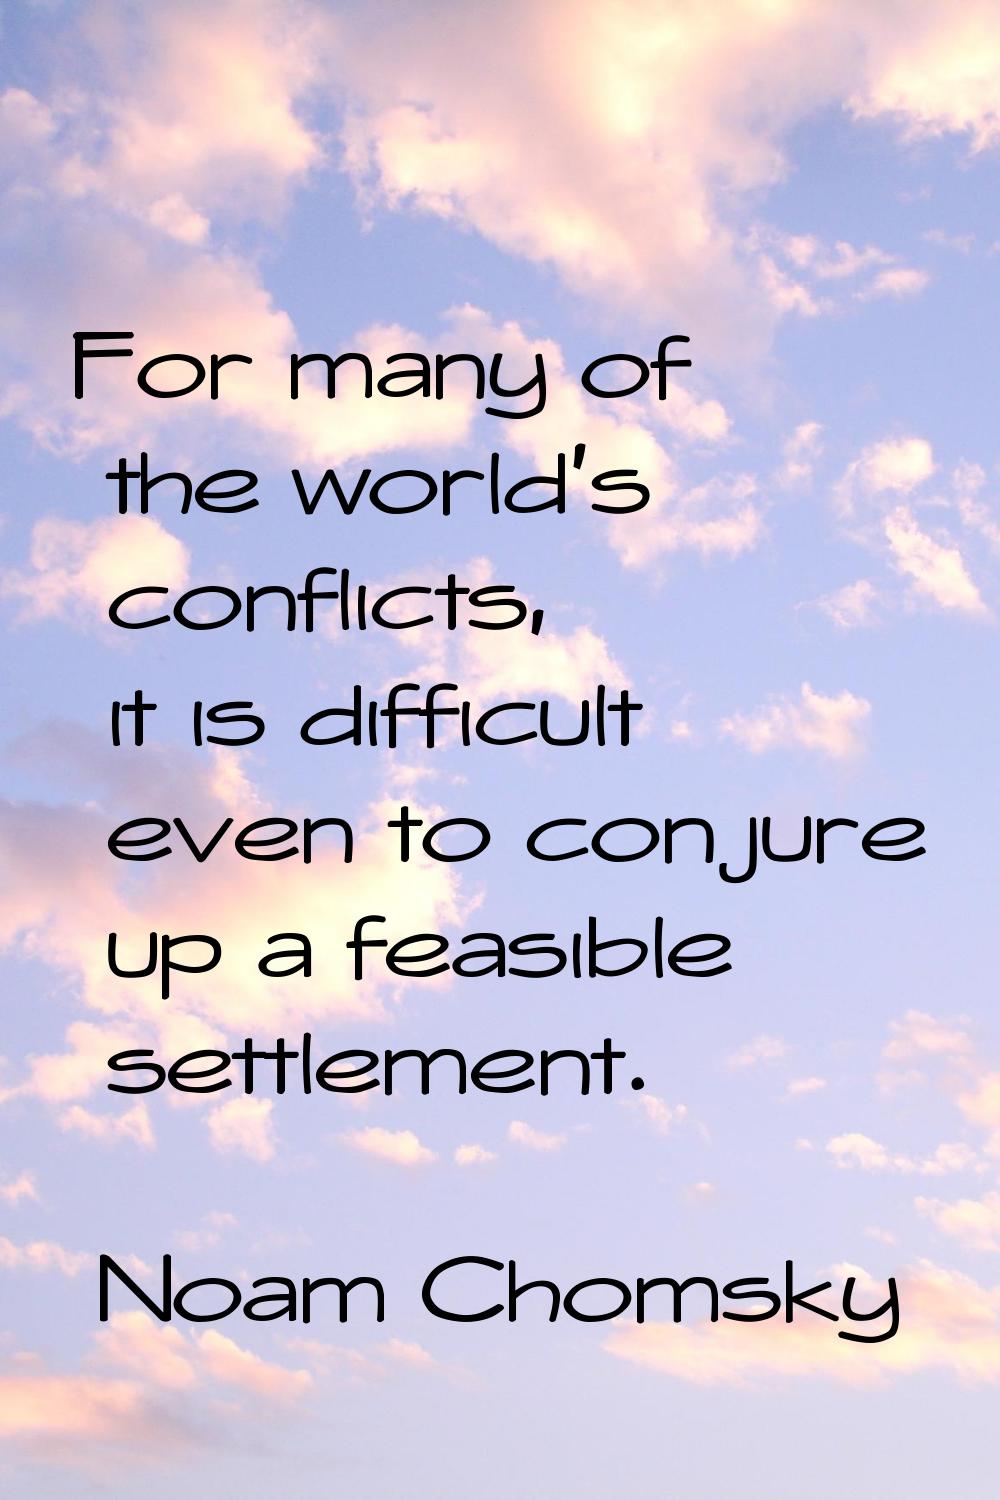 For many of the world's conflicts, it is difficult even to conjure up a feasible settlement.